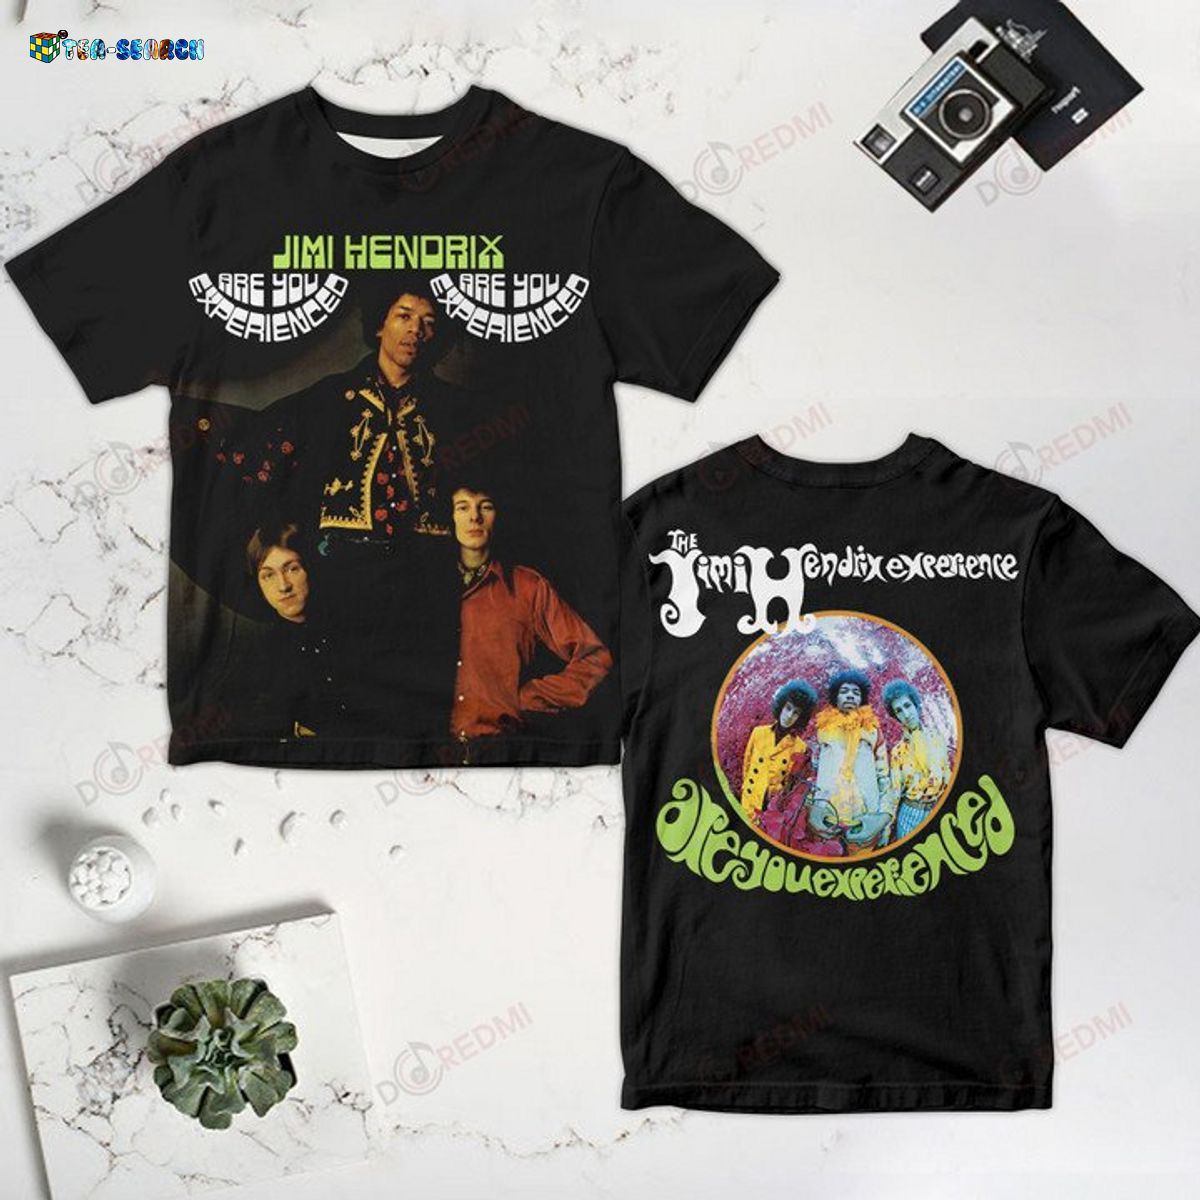 (Big Sale) Are You Experienced Album The Jimi Hendrix Experience 3D Shirt